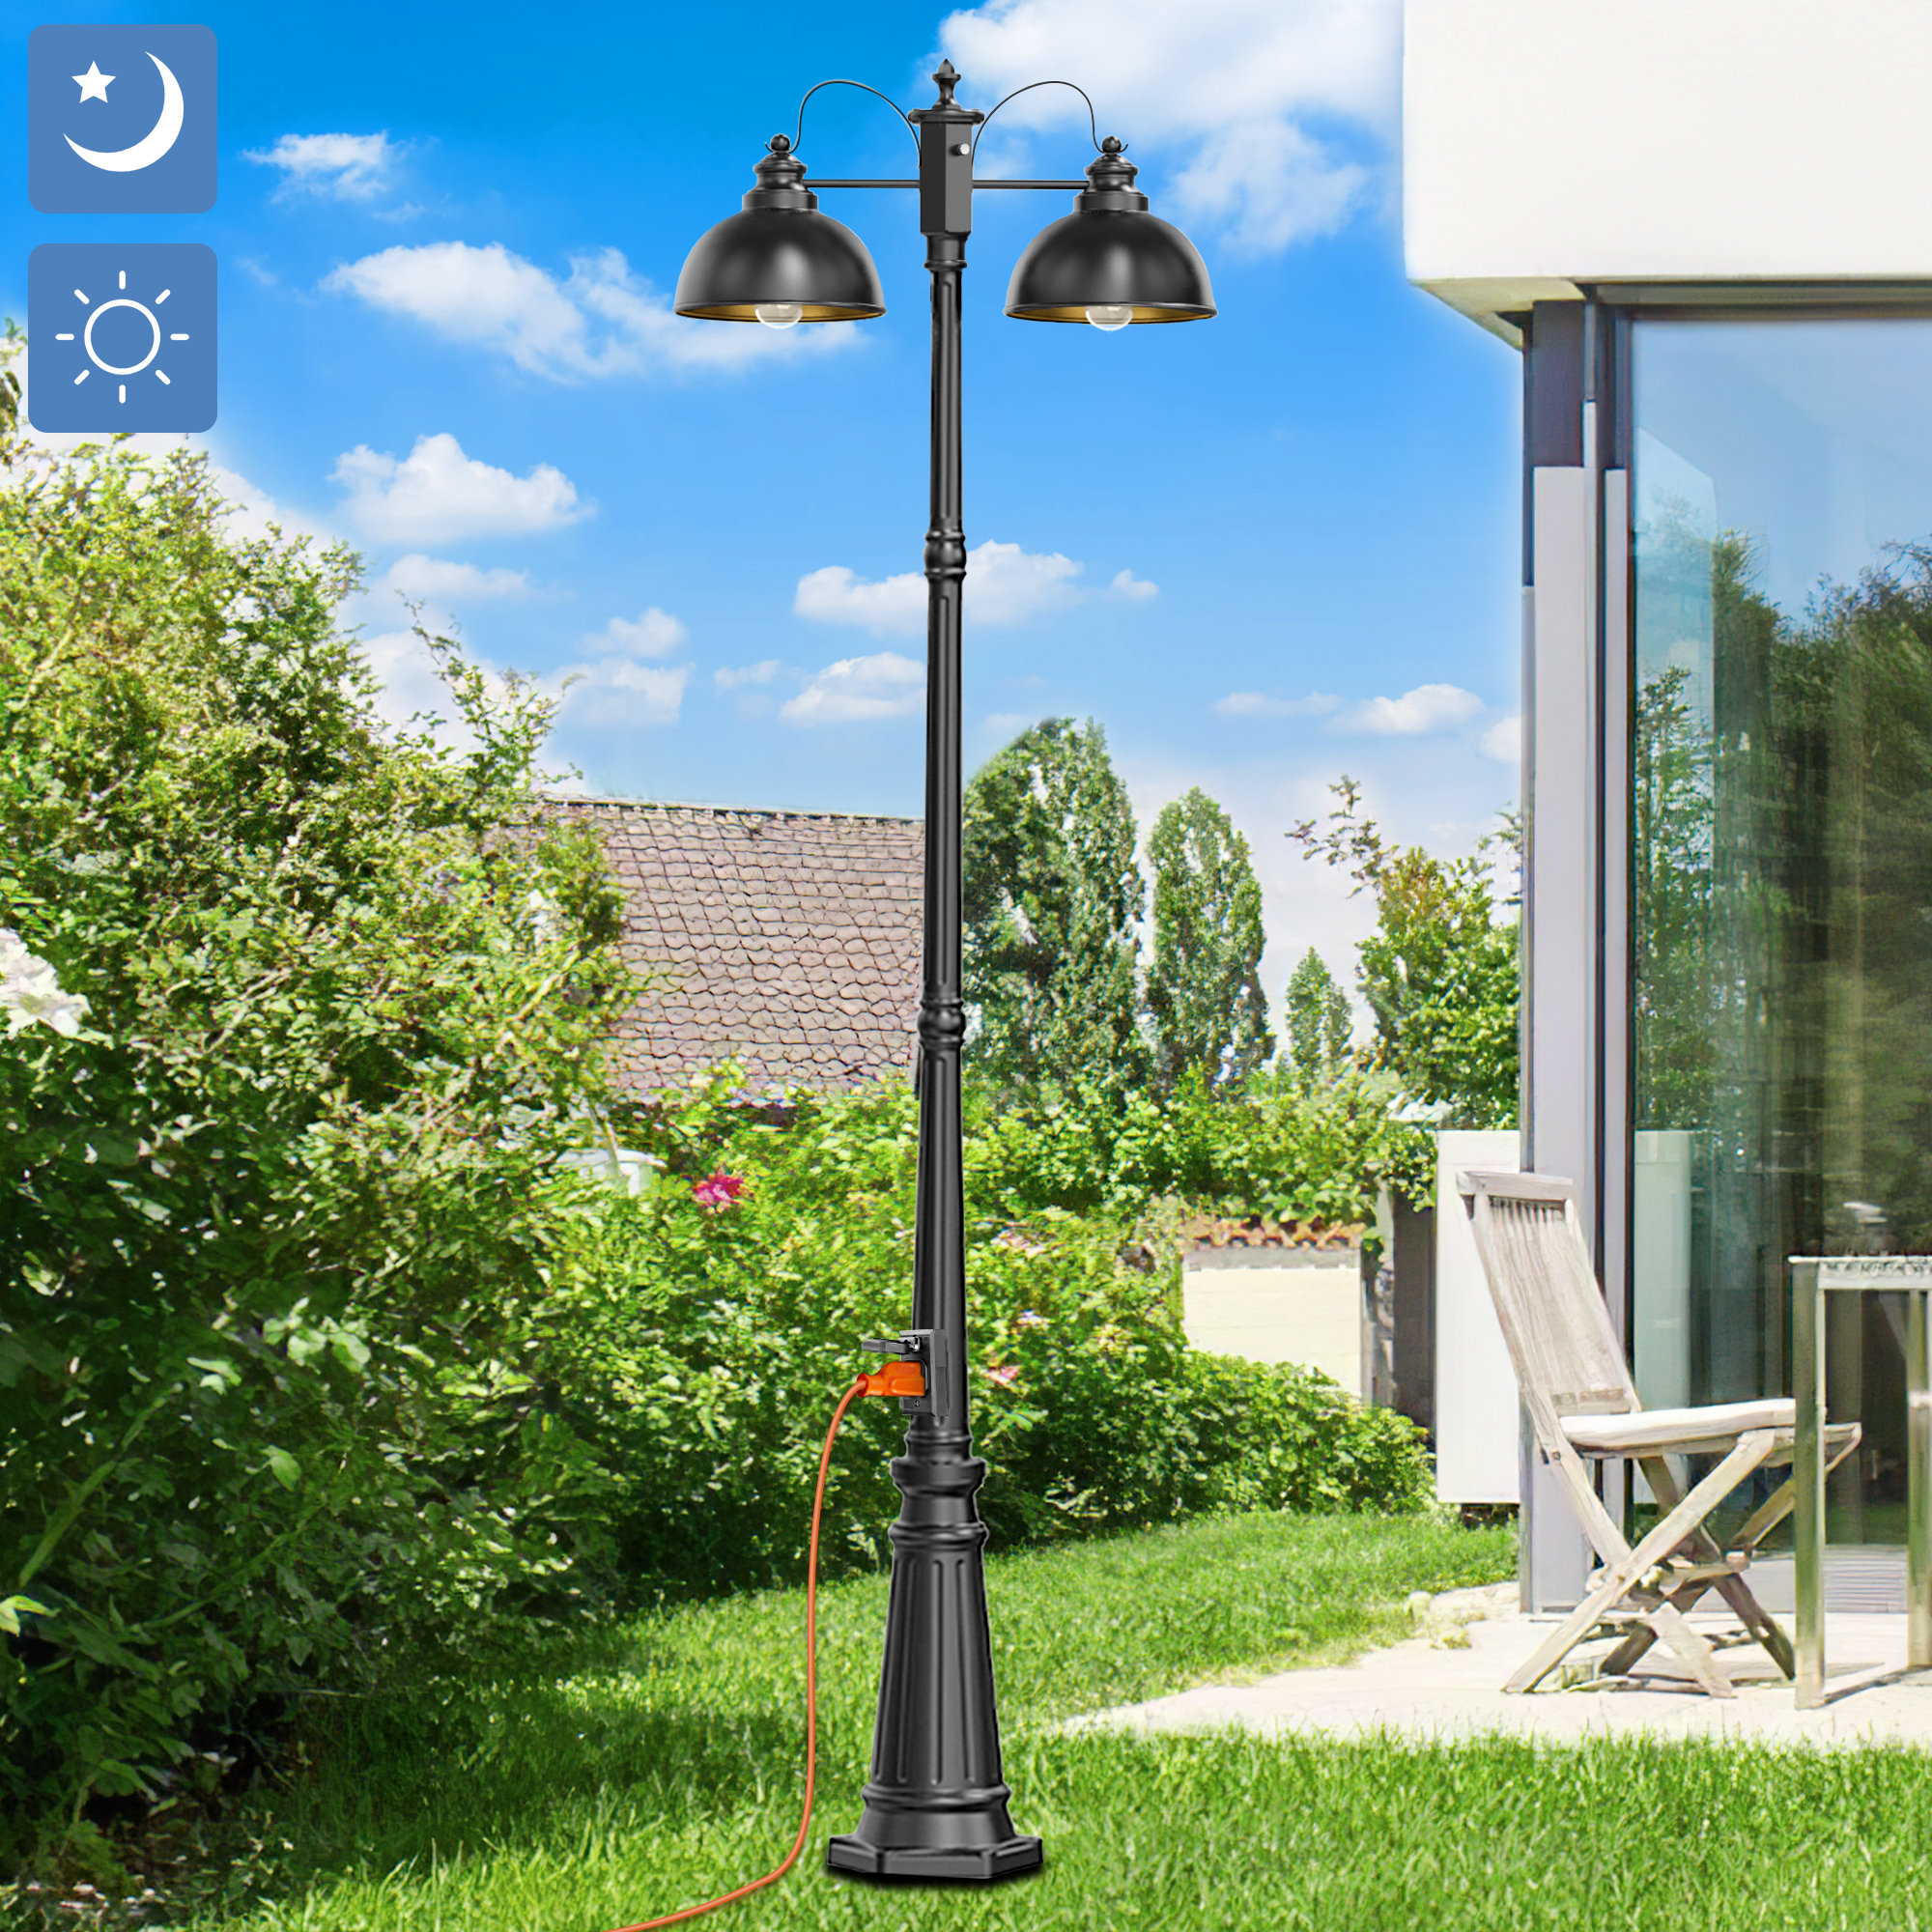 Dusk to Dawn Outdoor Lamp Post Lights with GFCI Outlet,Double-Head Farmhouse Street Light Fixture,Aluminum Exterior Black Pole Lights,Waterproof Lante - 1